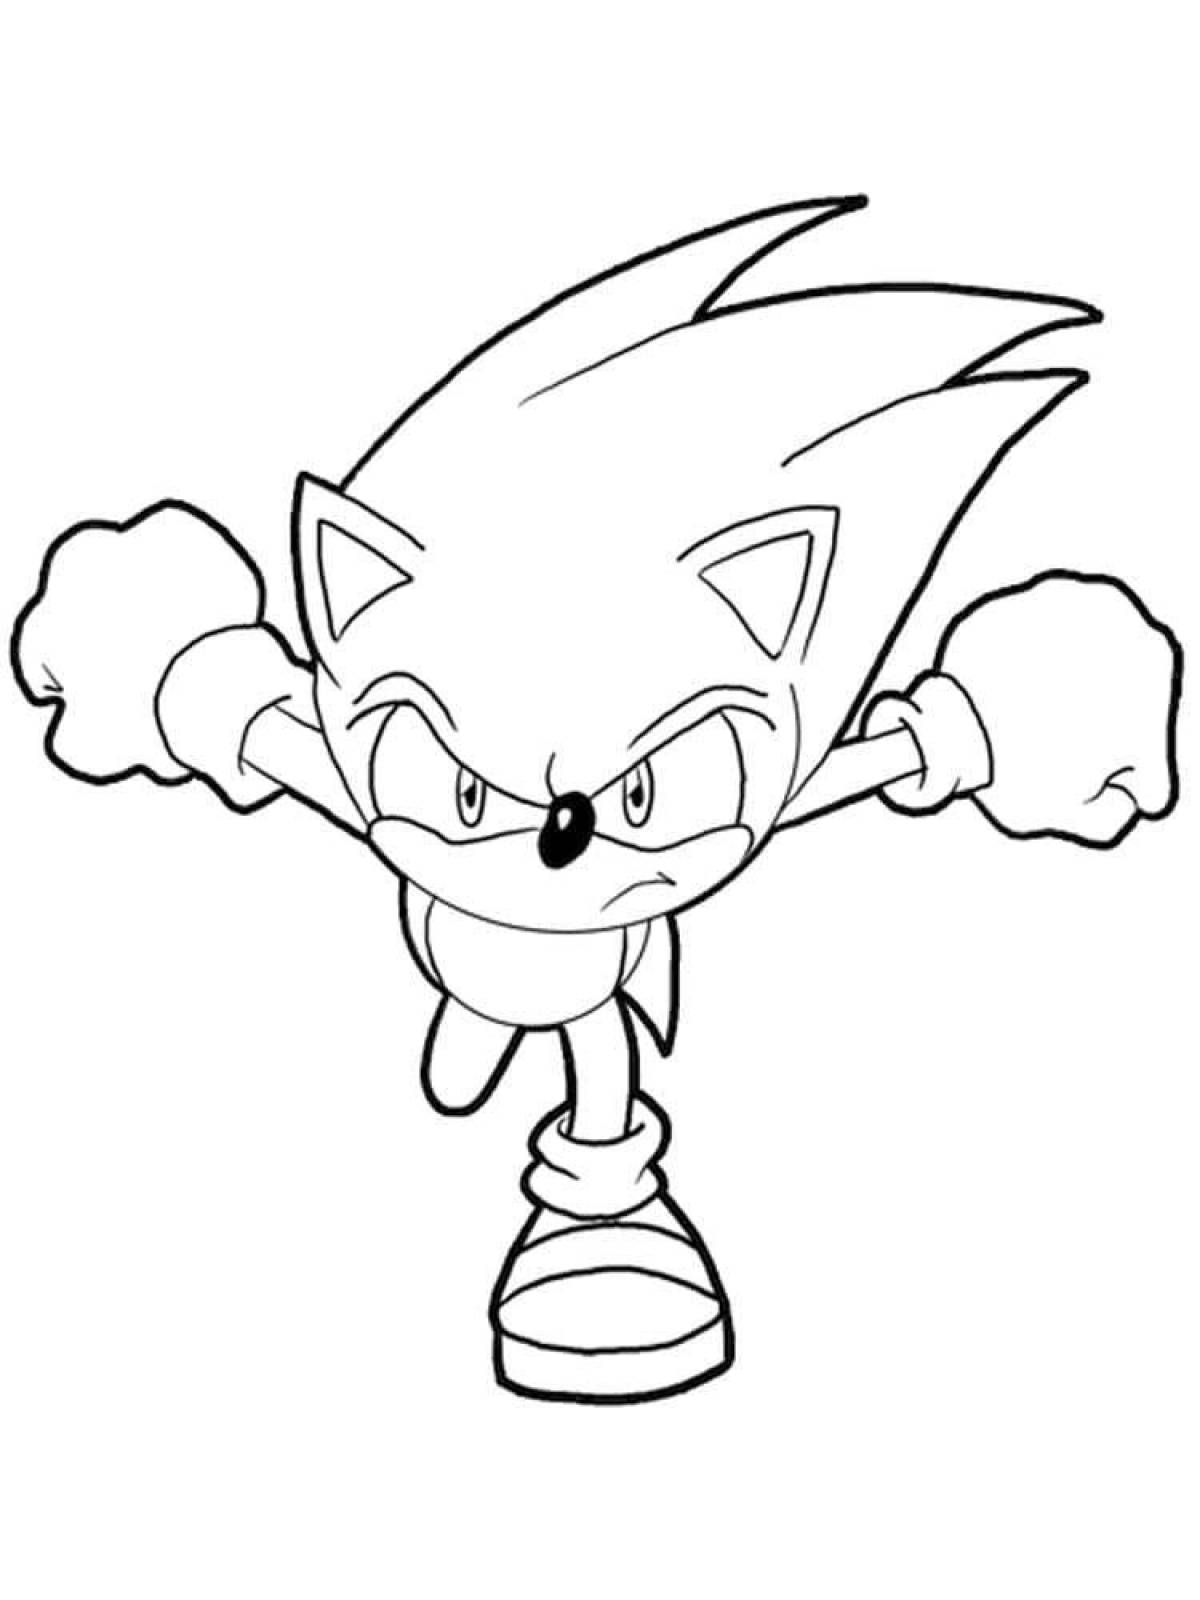 Bright coloring for drawing sonic